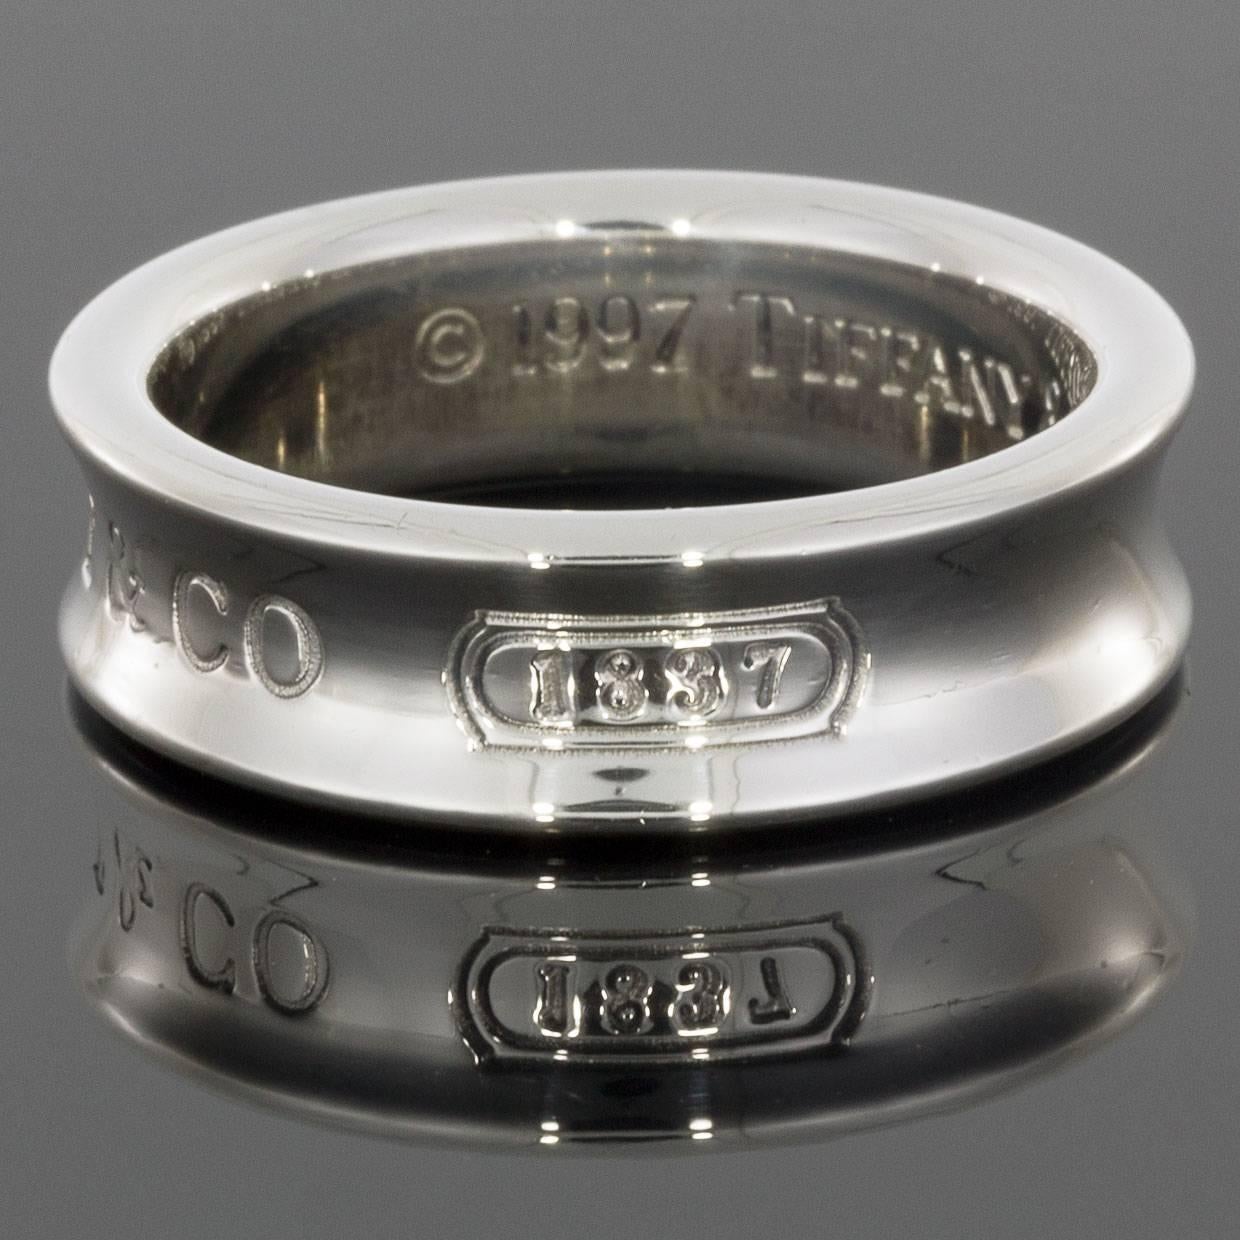 Tiffany & Co jewelry has long been admired for its quality and beauty, and this mens' wedding band is no exception. The band is engraved with the year and location Tiffany was founded — 